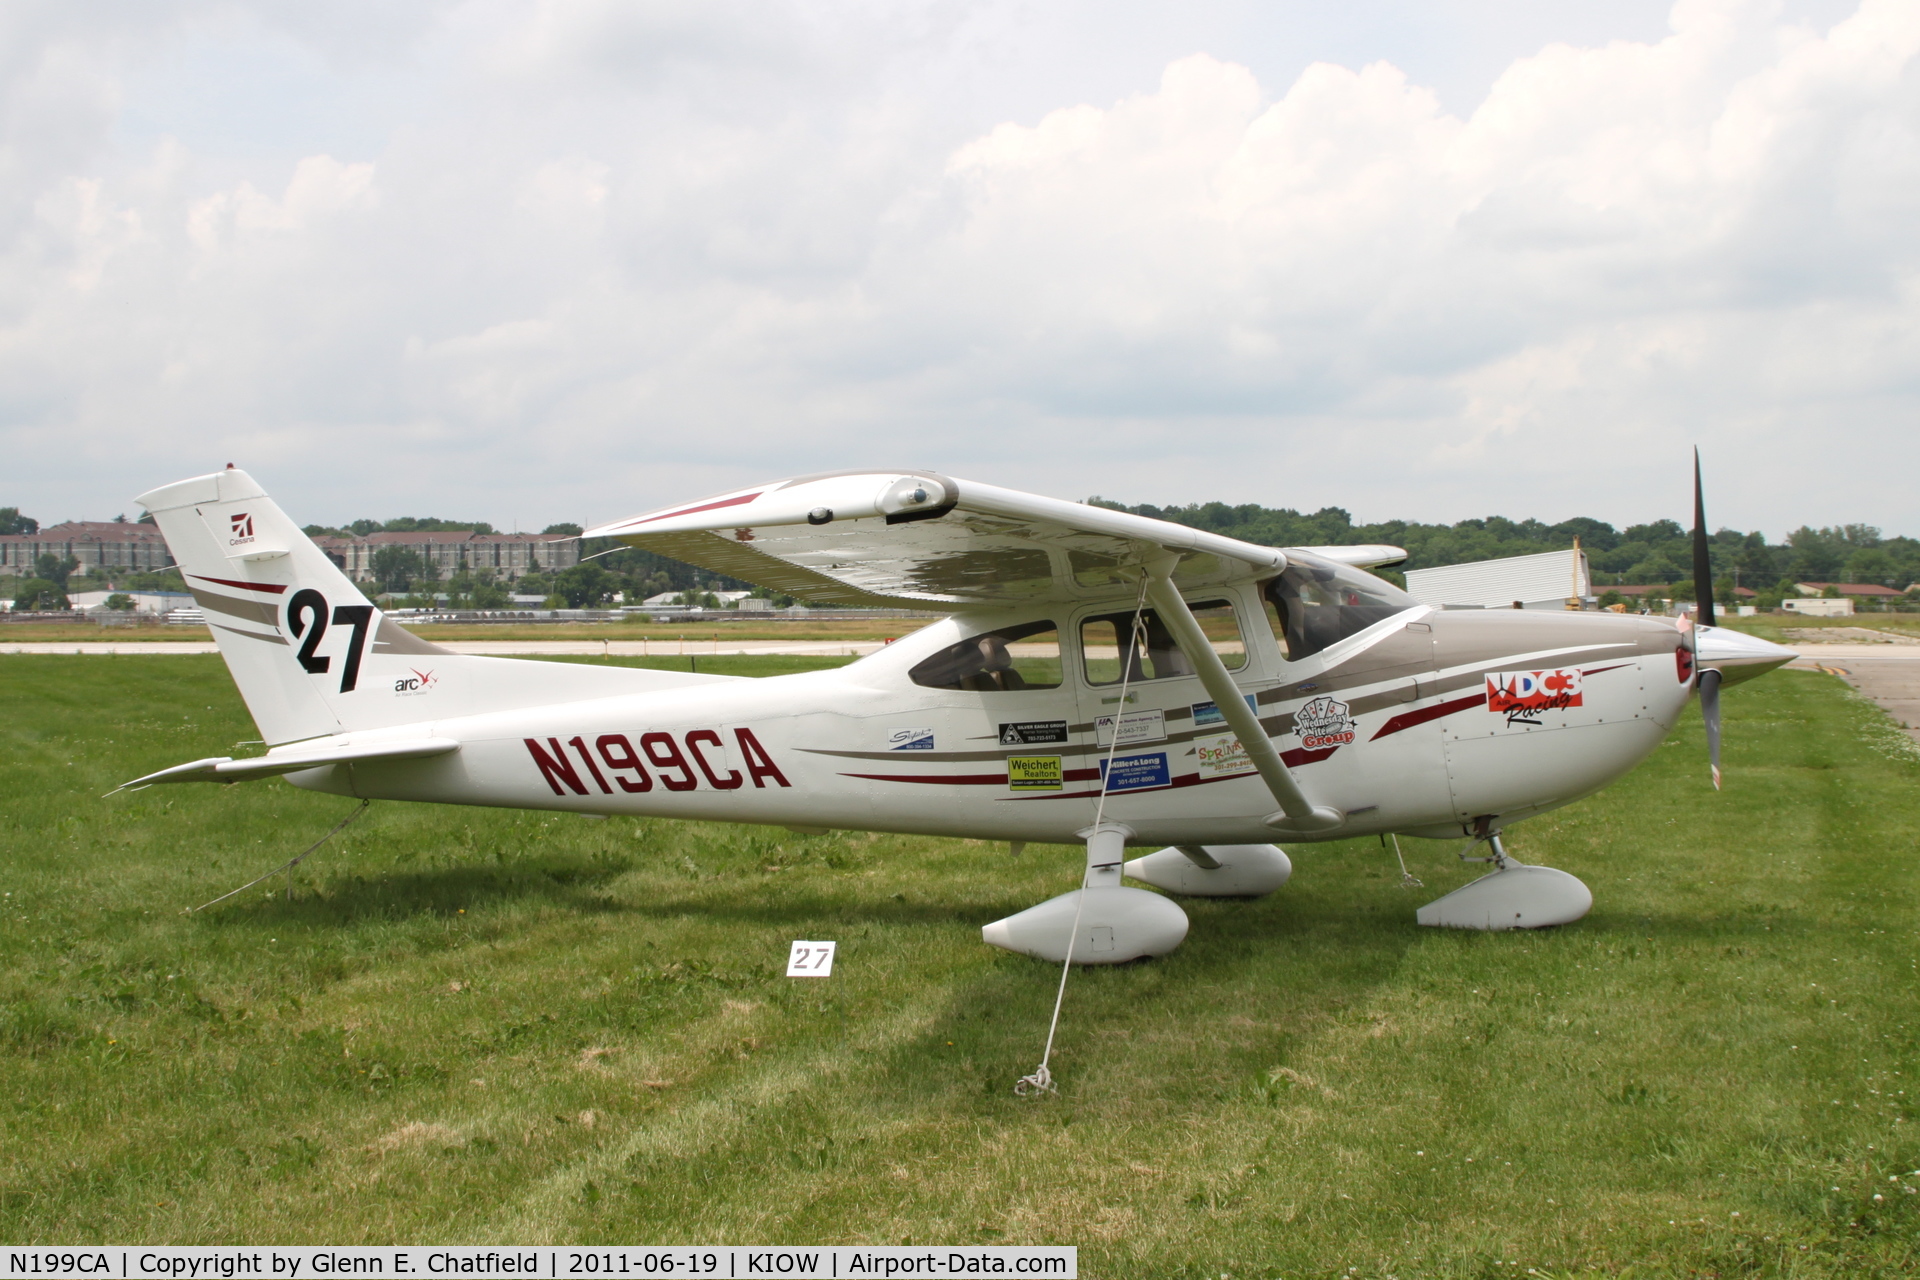 N199CA, 2005 Cessna 182T Skylane C/N 18281548, In town for the 99s' Air Race Classic. Iowa City starting point dropped due to weather.